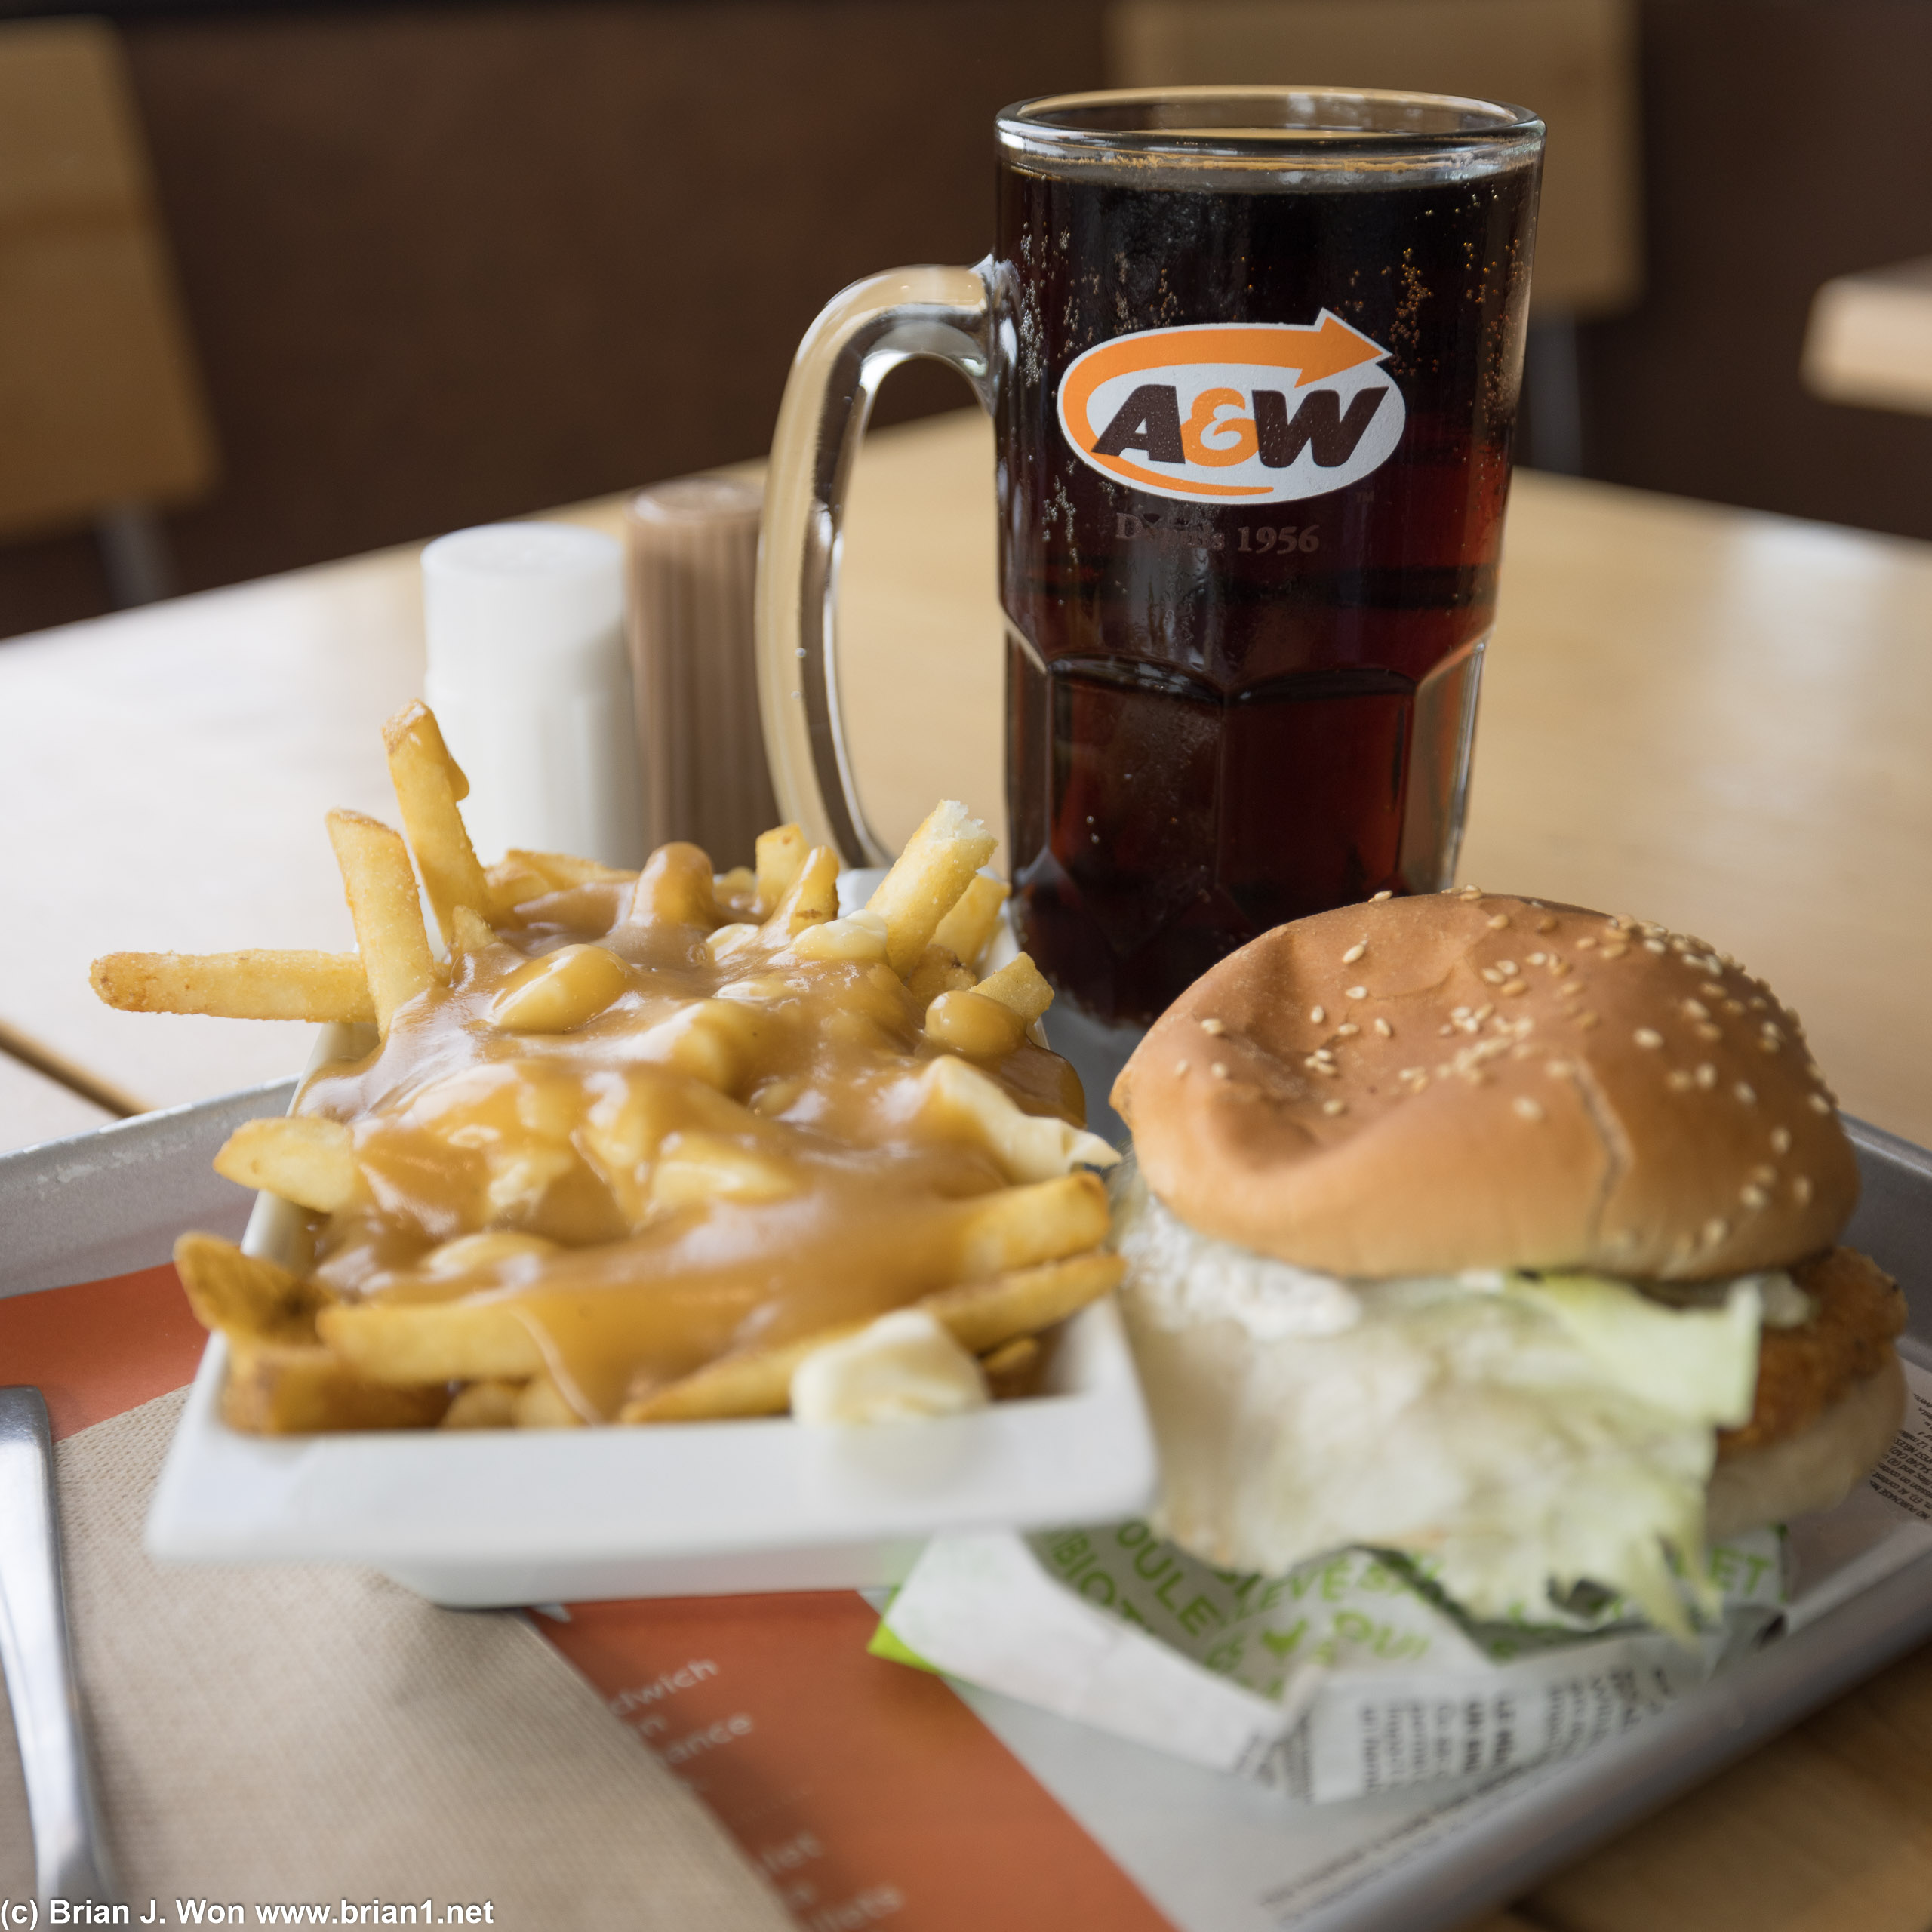 A&W for the root beer and poutine.